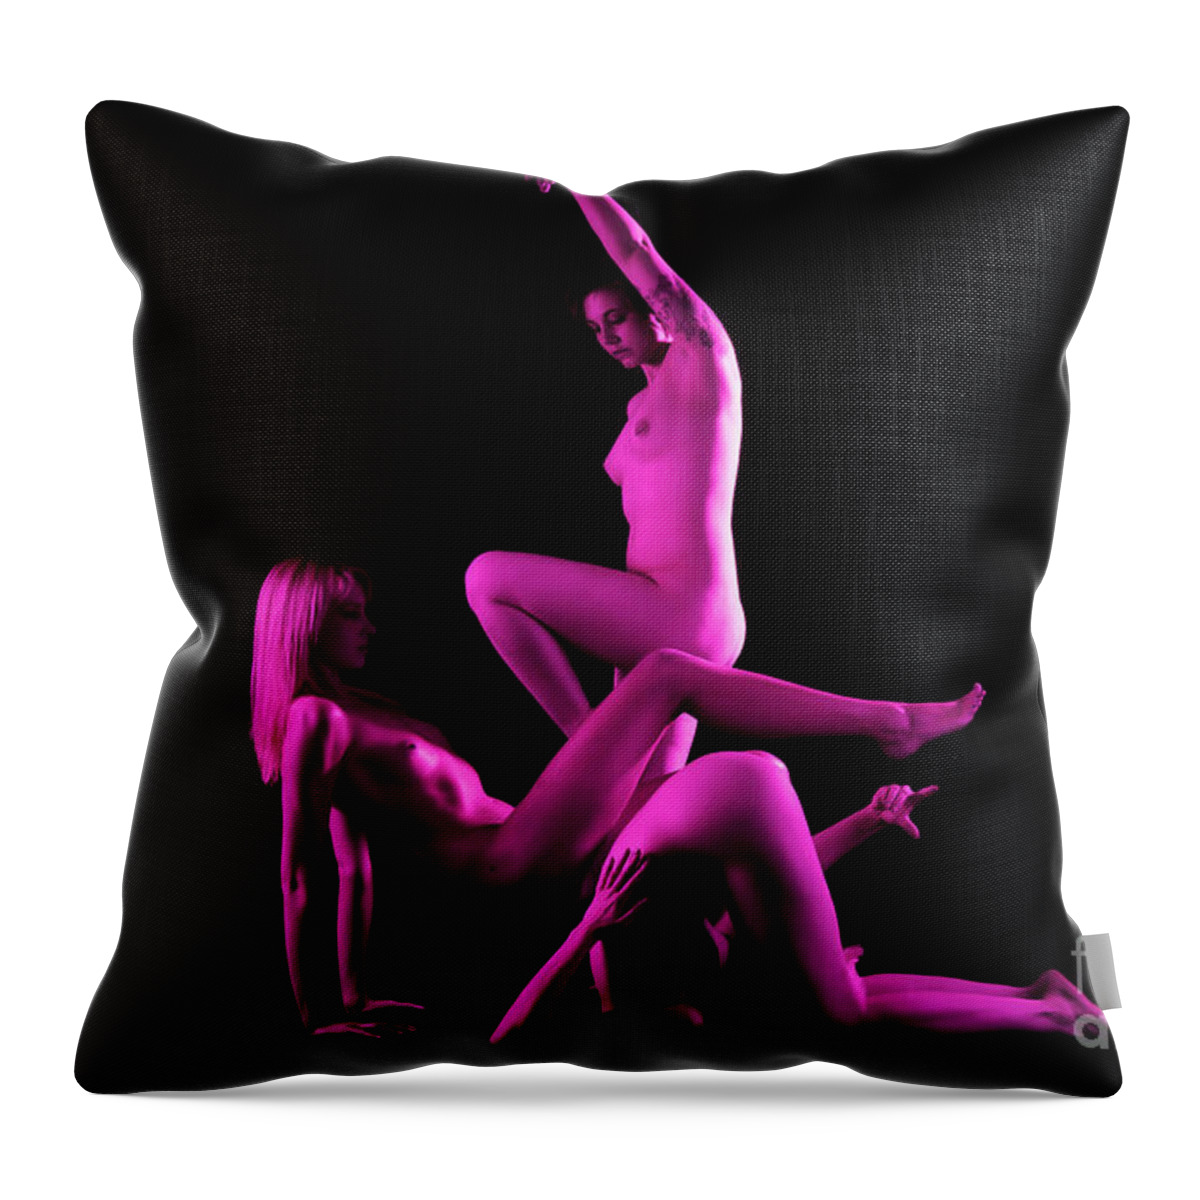 Magenta Throw Pillow featuring the photograph Synergy by Robert WK Clark